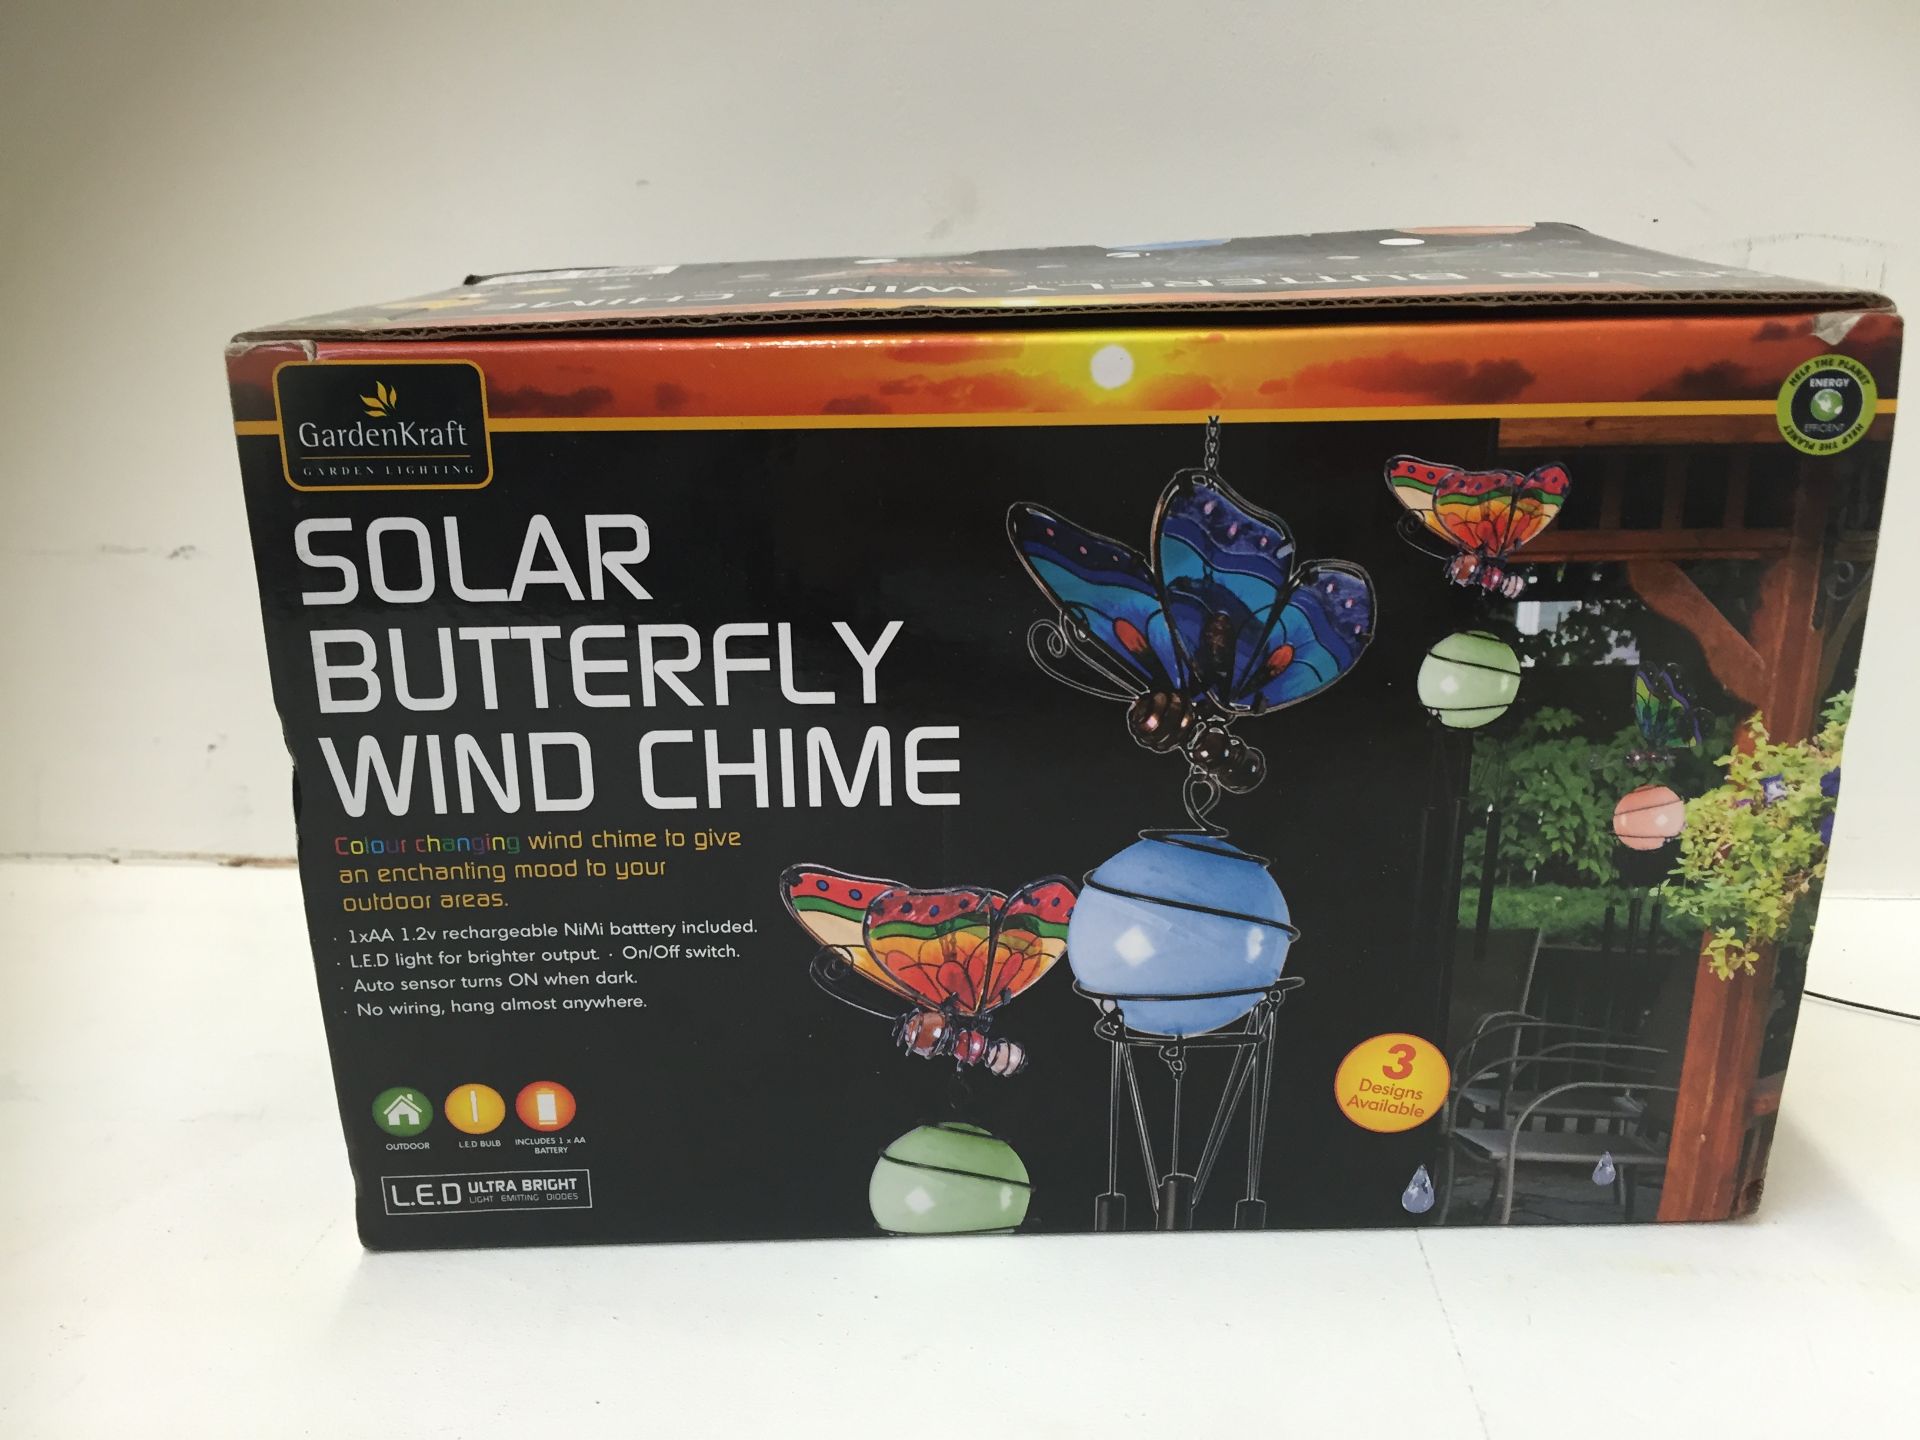 Solar Butterfly Wind Chime Colour Changing LED Light_RRP £14.92_B1 All lots in this auction are